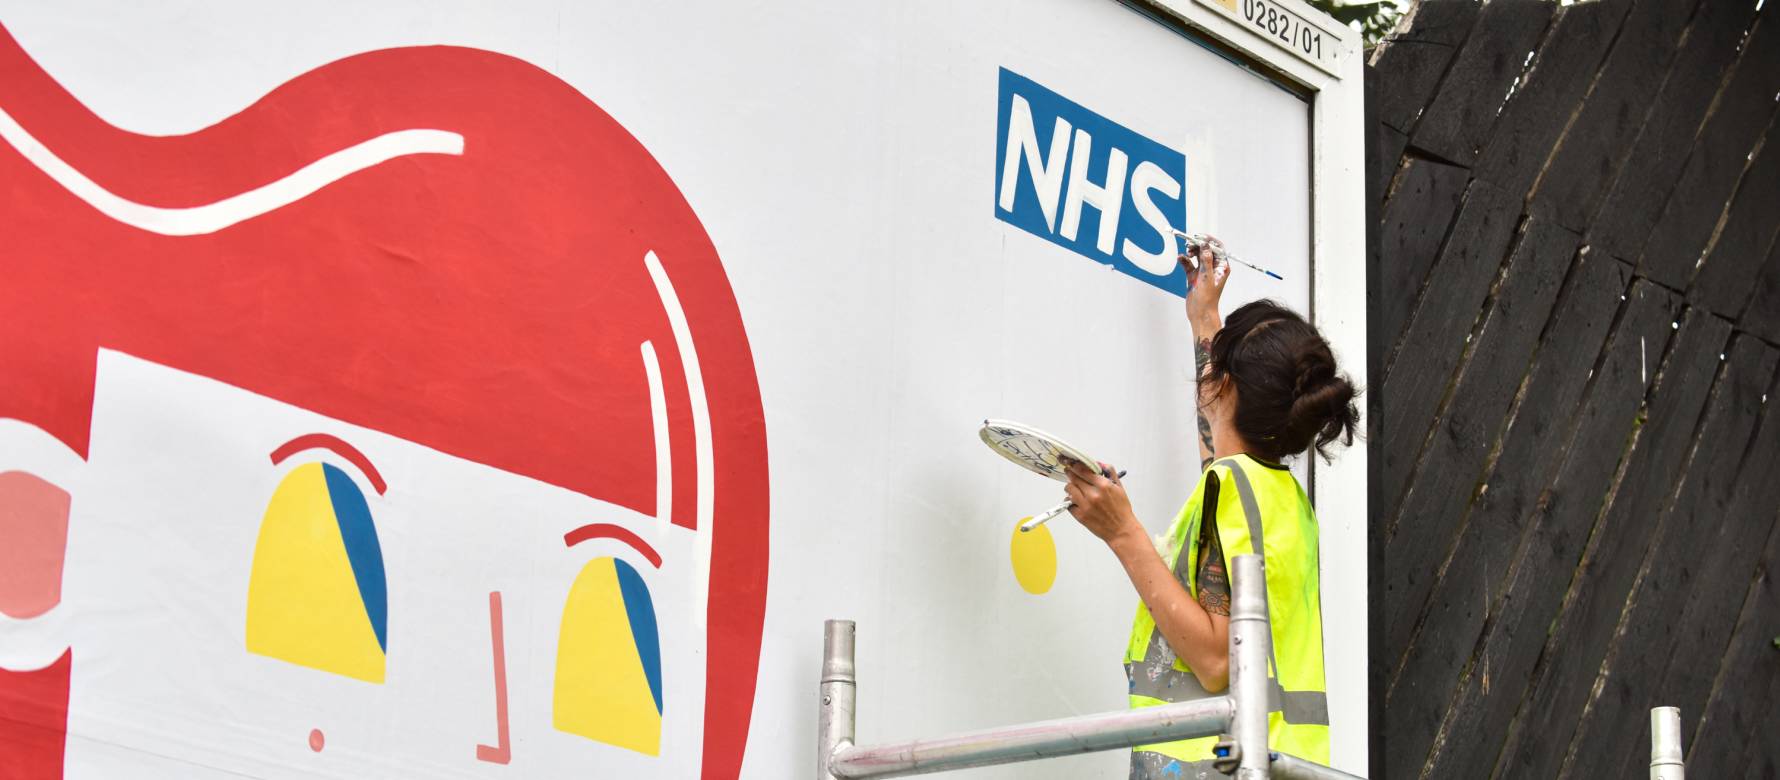 Painter painting a NHS logo on a billboard